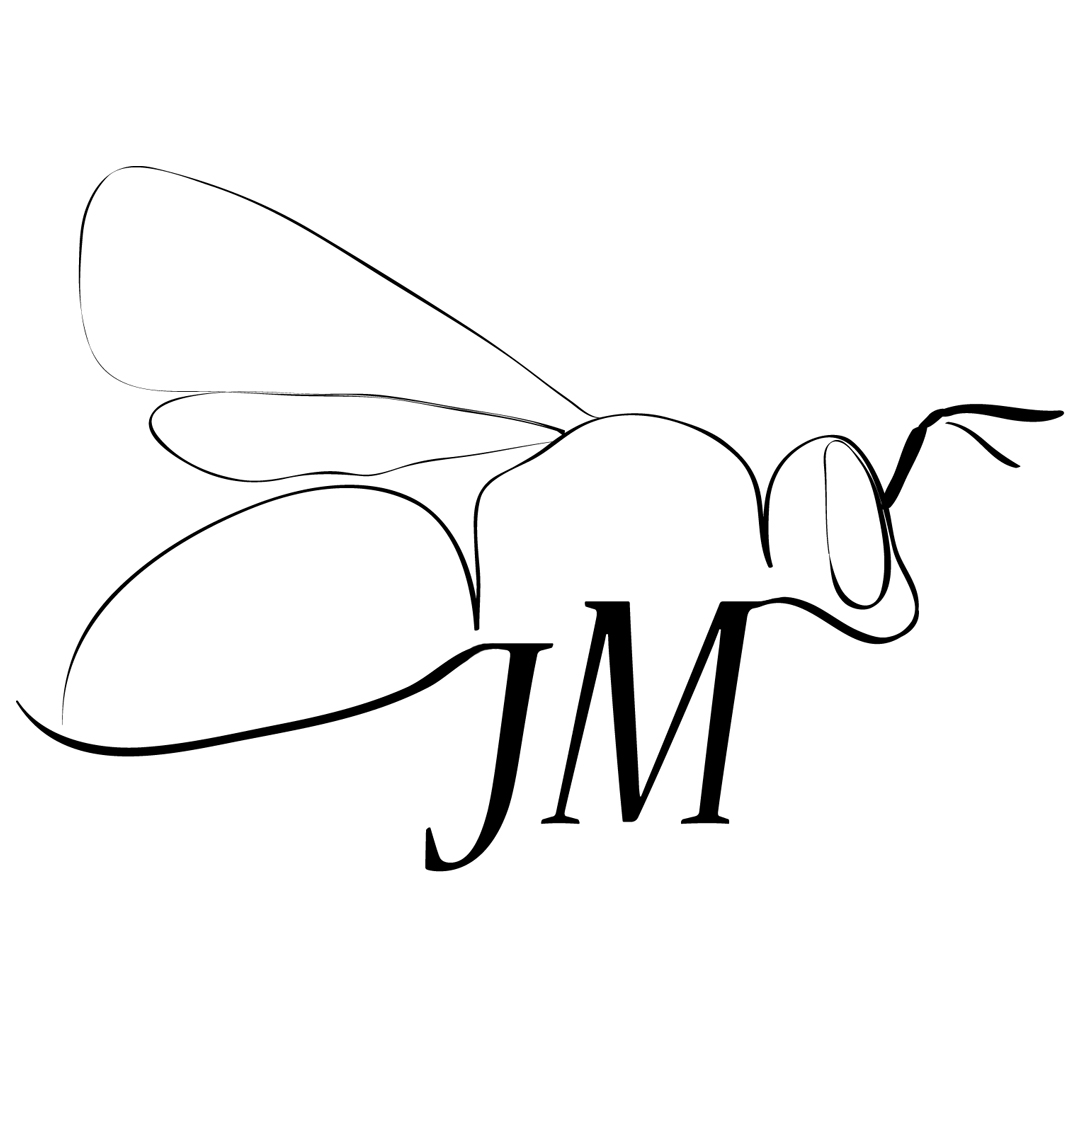 					View No. 1 (2013): Introducing the Journal of Melittology: An outlet for disseminating bee research and raising melittological awareness.
				